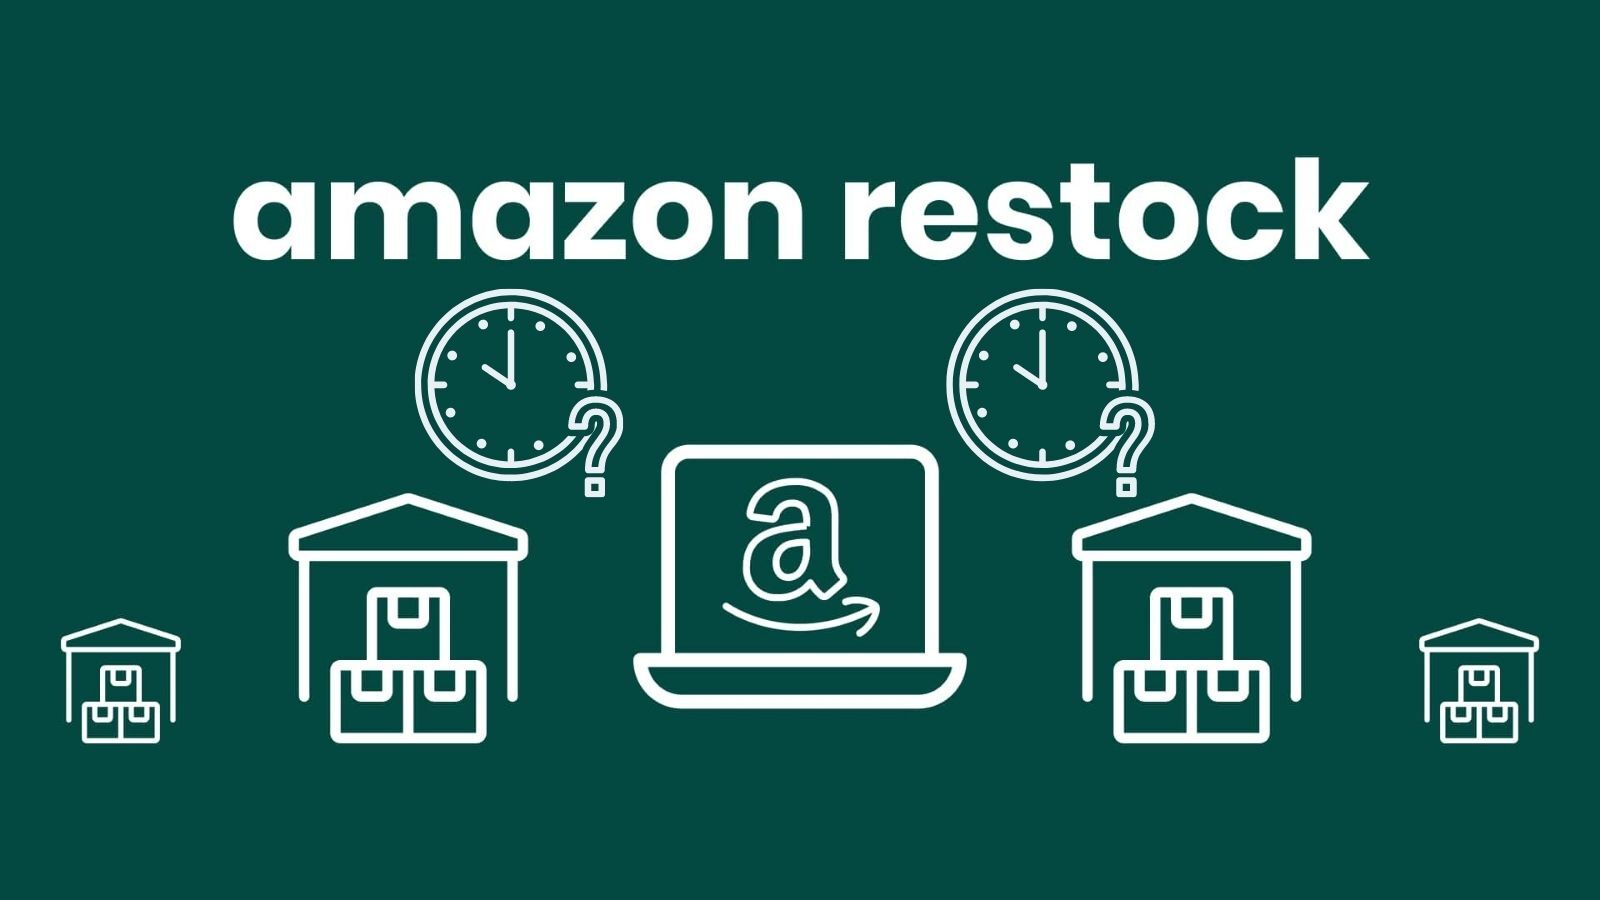 When Does Amazon Restock? (Some Useful Tips)